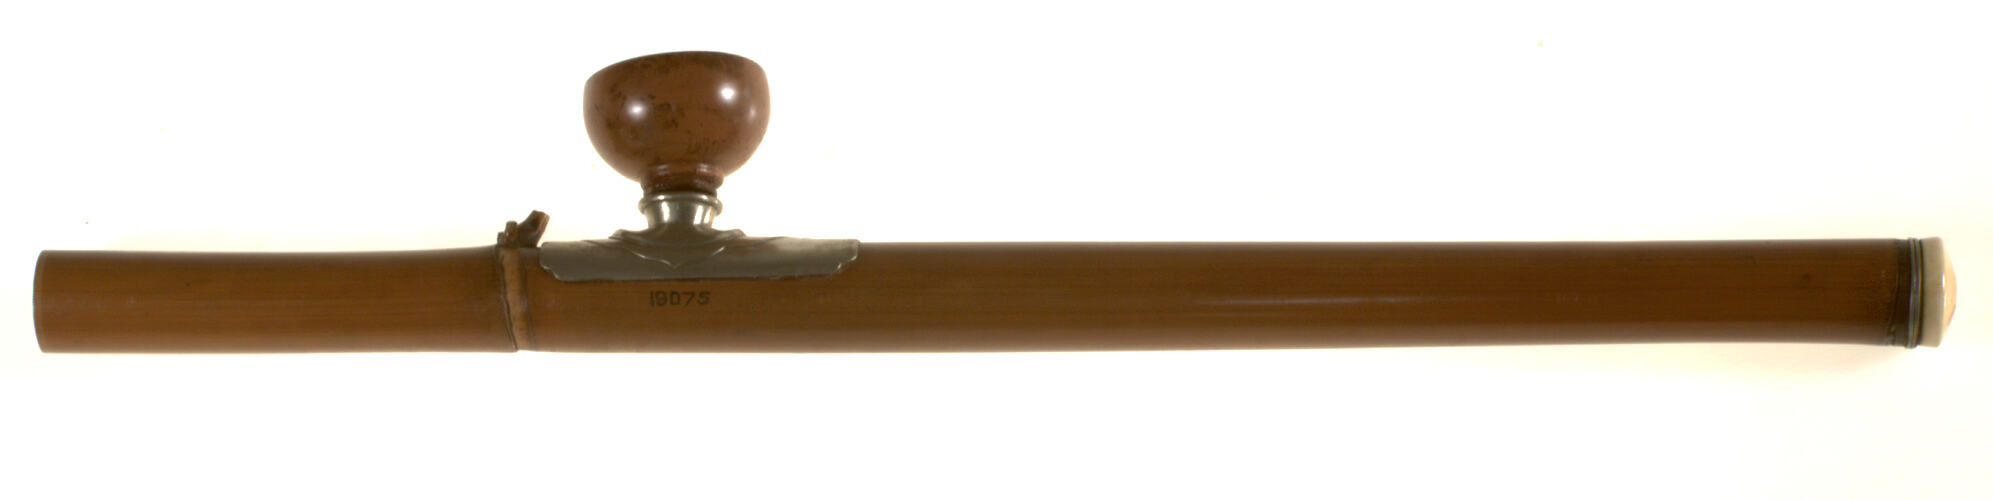 Opium Pipe - Bamboo, Ivory & Pottery, circa 1900s-1930s